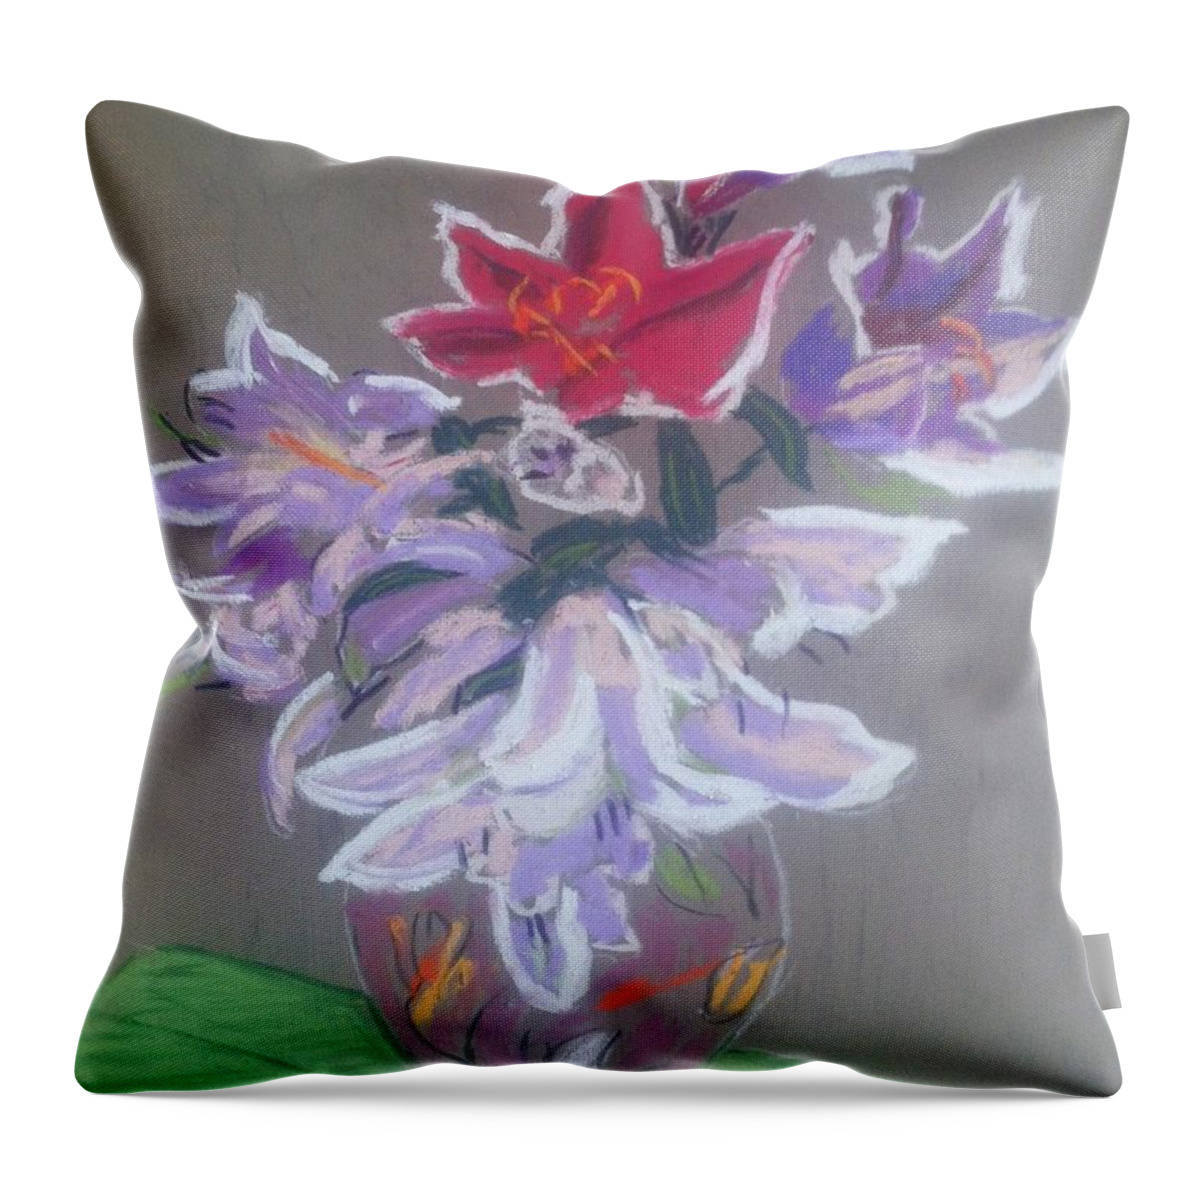 Pastels Throw Pillow featuring the pastel Flowers by Rae Smith PAC